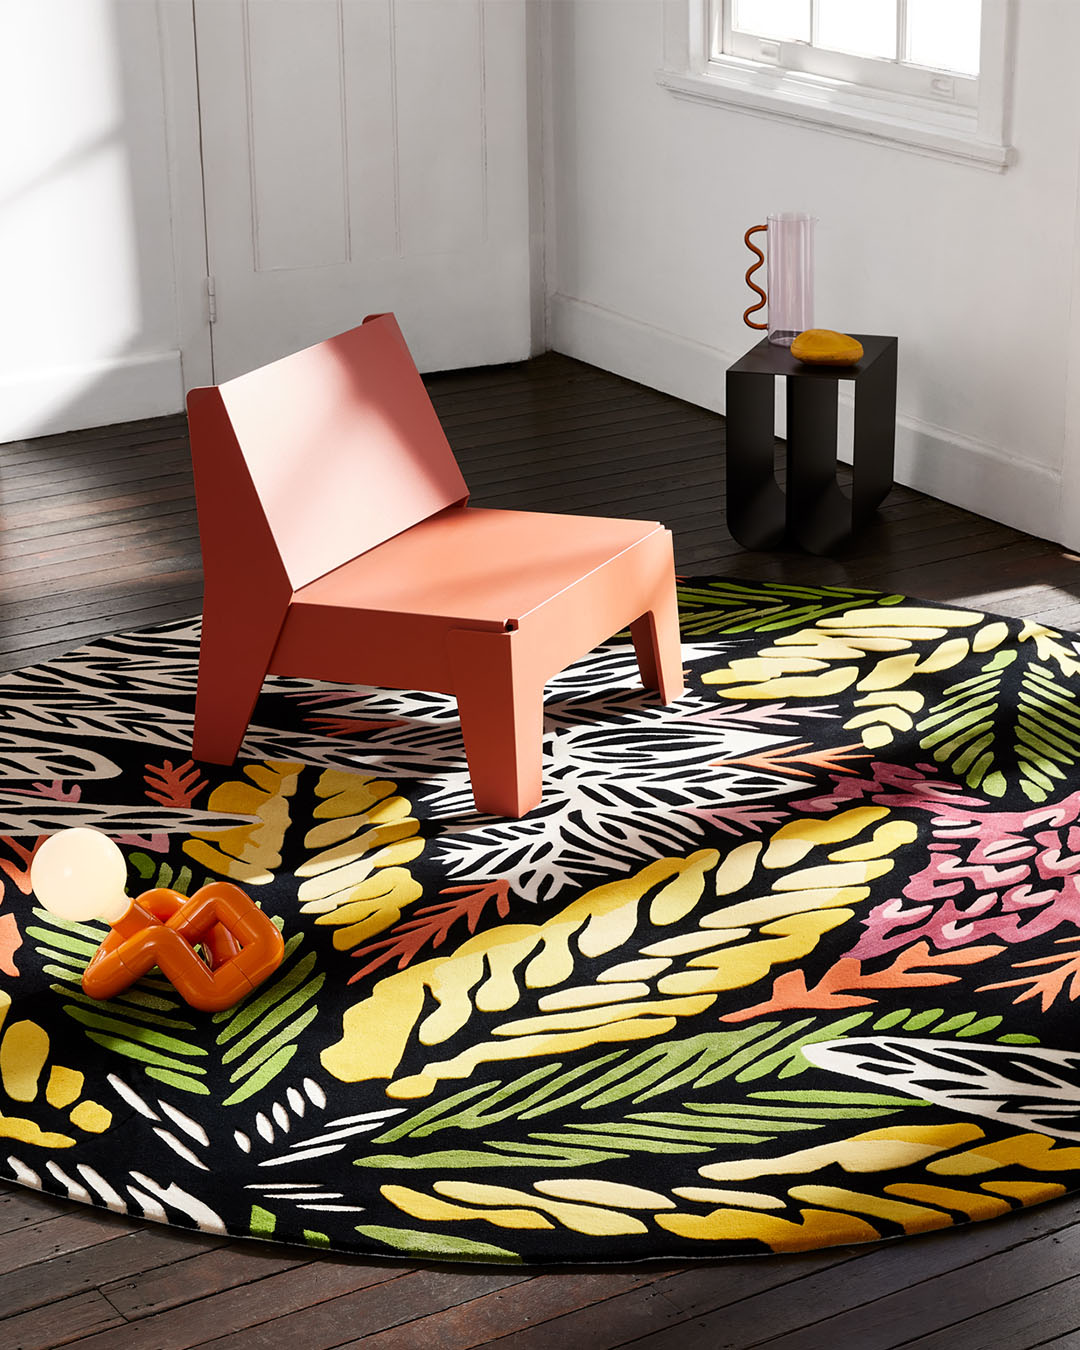 Styled image of round floral Complex Ecologies rug by Tamika Grant Iramu